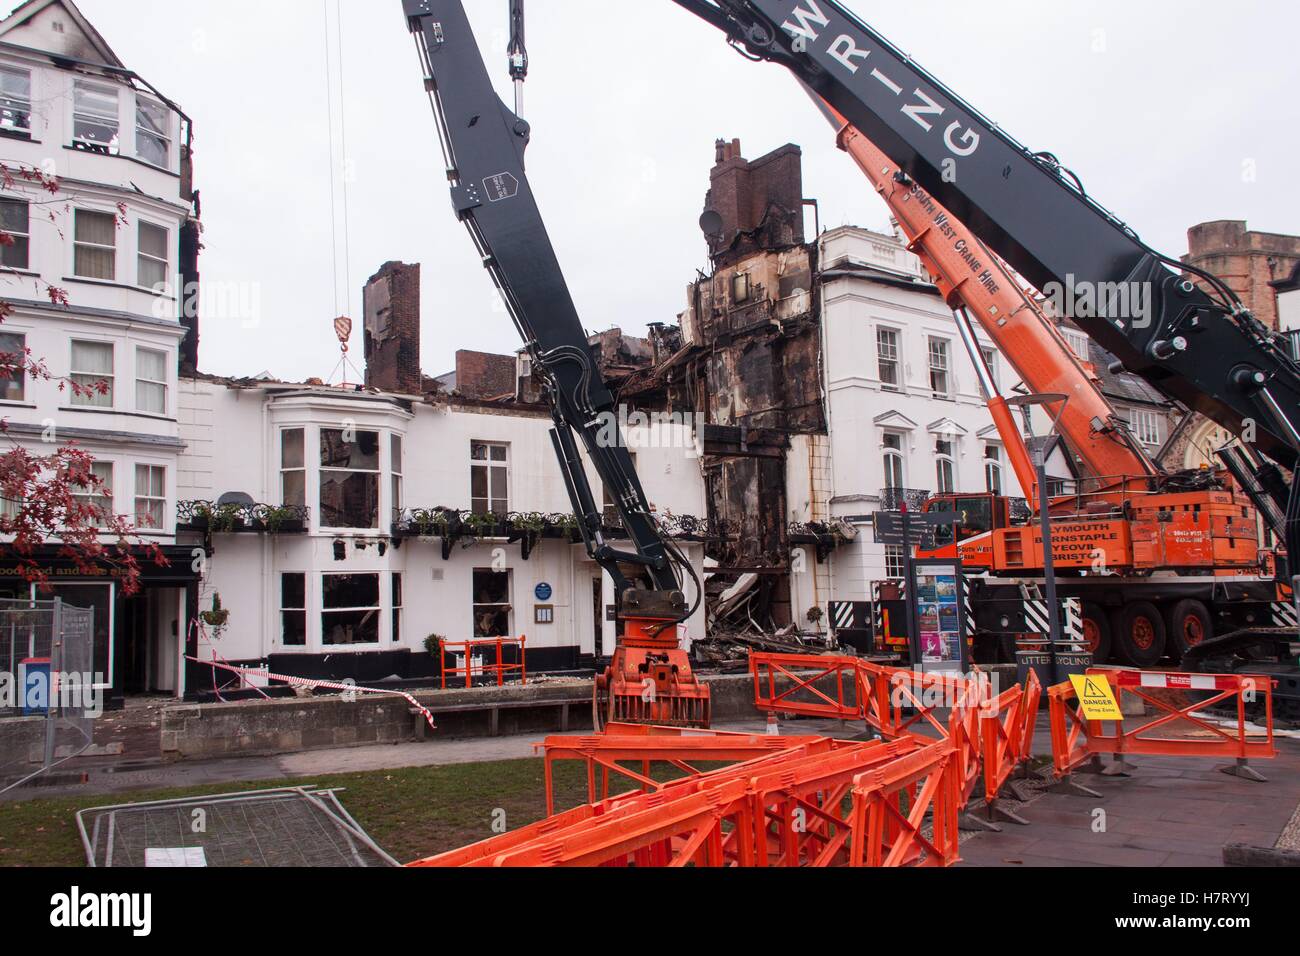 Exeter, UK. 8th November, 2016. The remains of the Royal Clarence - Britain's oldest hotel - have become the biggest tourist attraction in the city following the recent fire.. Despite being sited directly opposite the ancient cathedral with it's astronomical clock and the longest vaulted ceiling in England - the burned out remains have become the 'must see' event in the city. Credit:  South West Photos/Alamy Live News Stock Photo